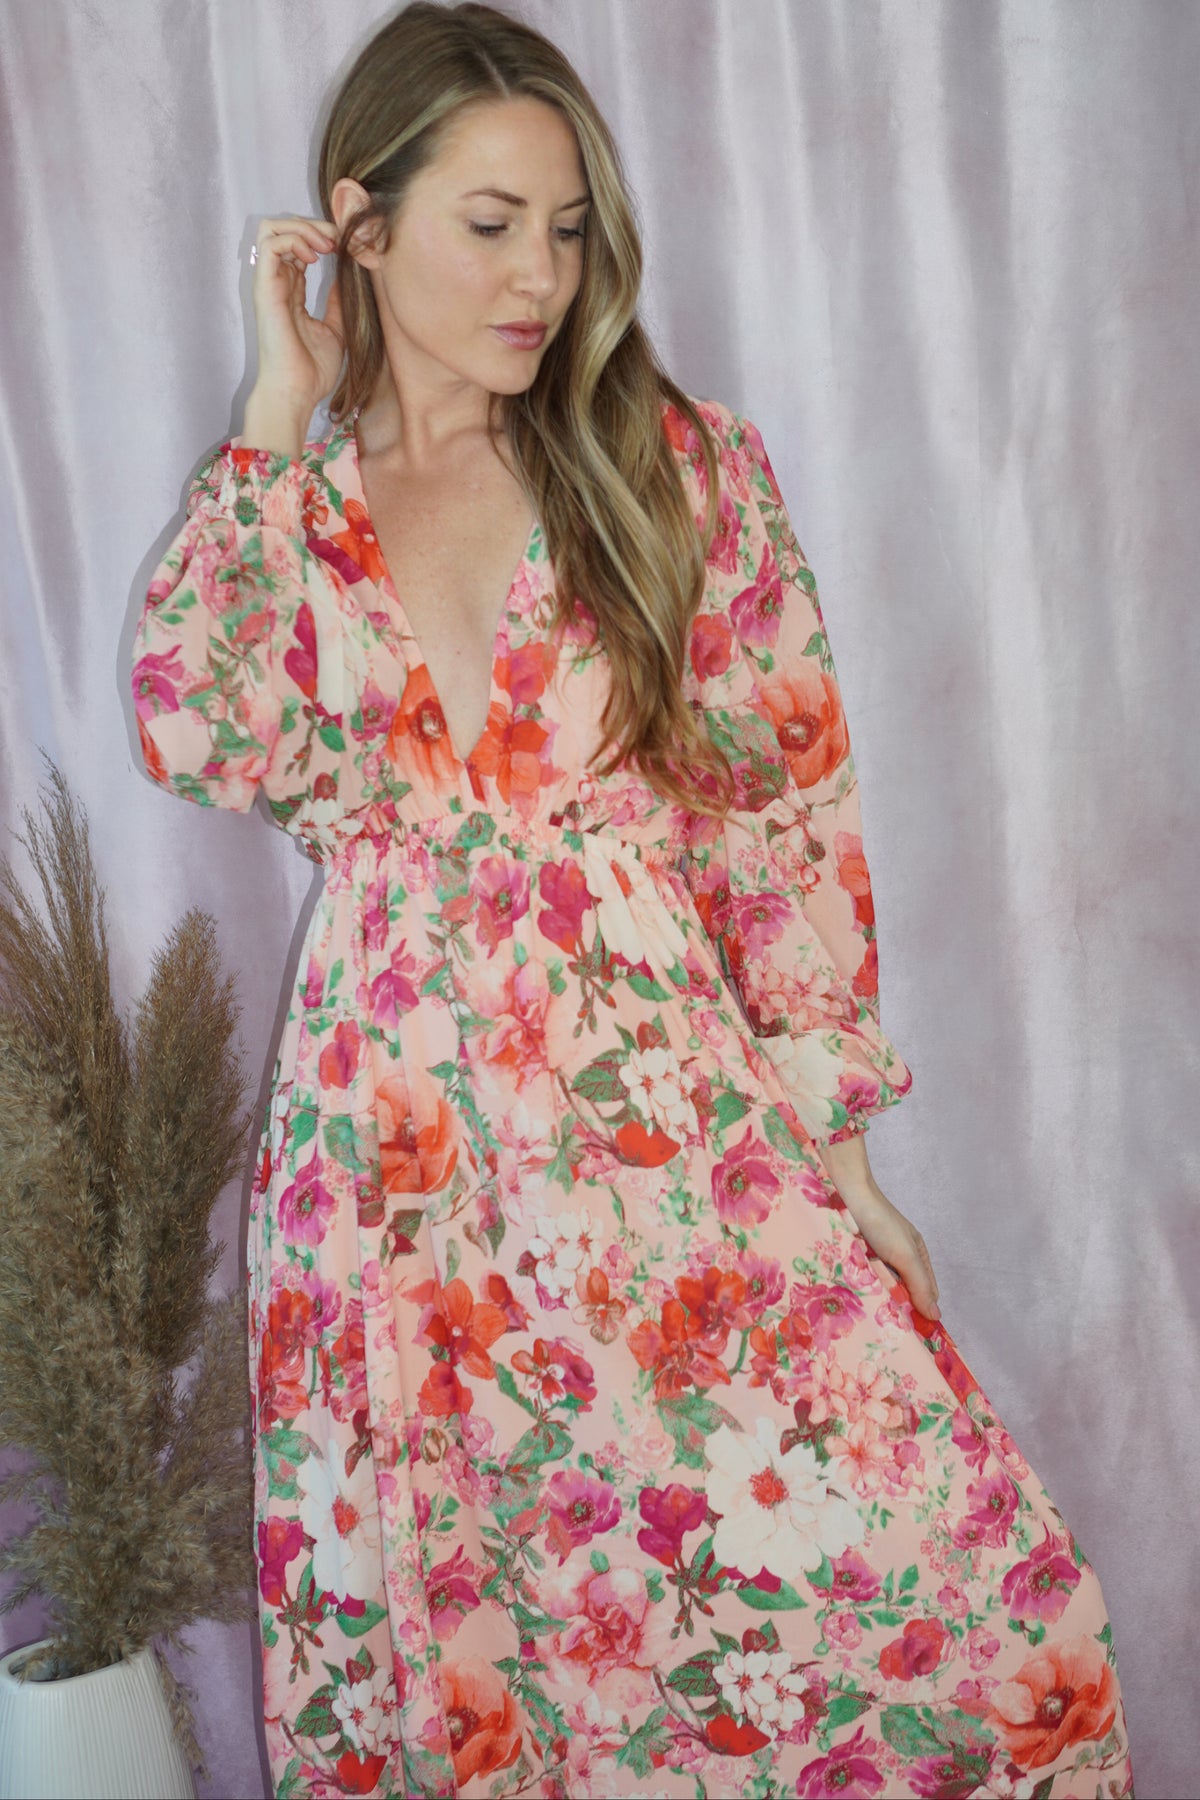 Feeling pink and floral dress